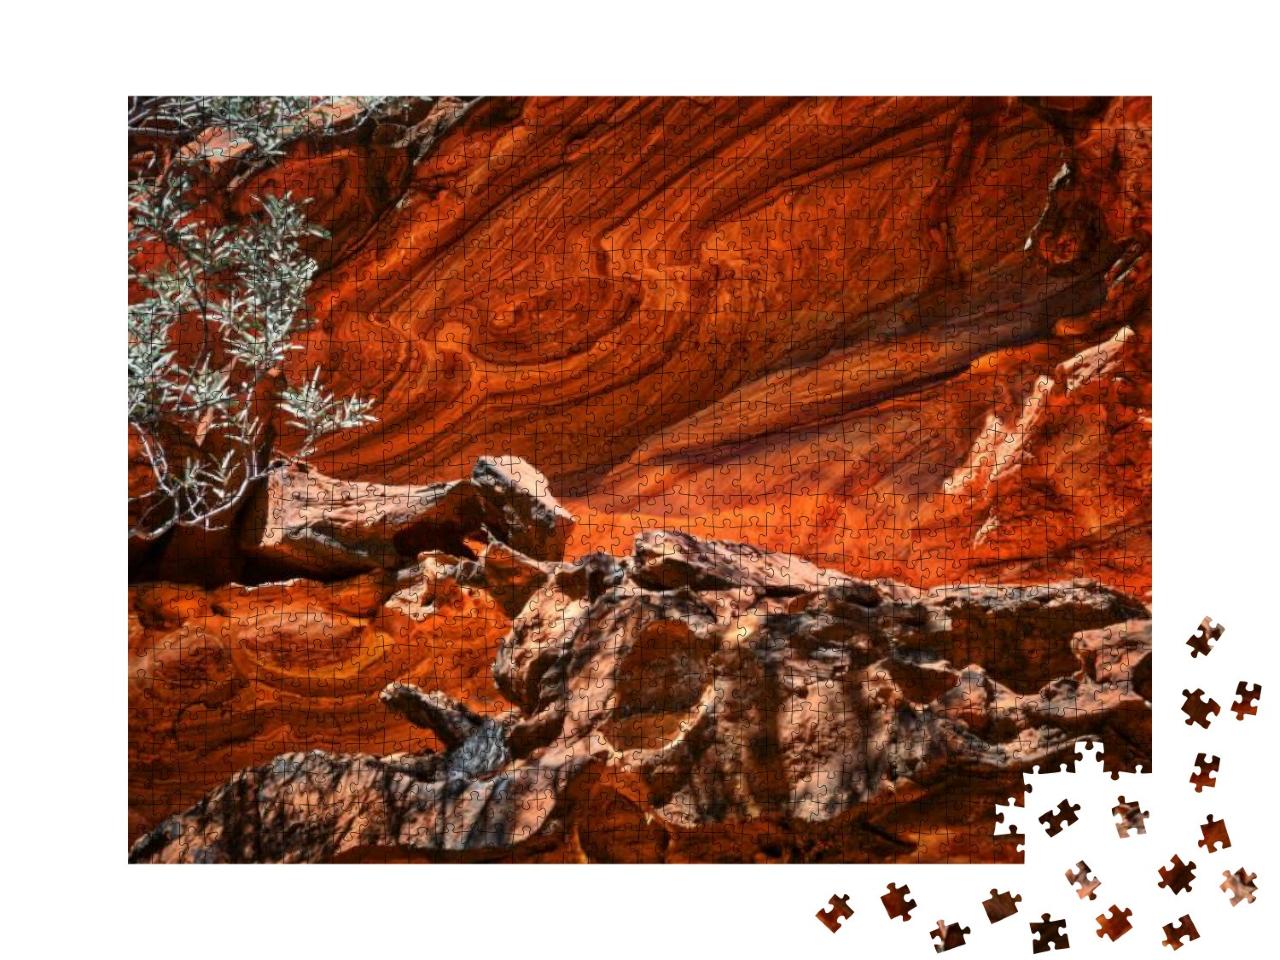 Kings Canyon Rocks... Jigsaw Puzzle with 1000 pieces